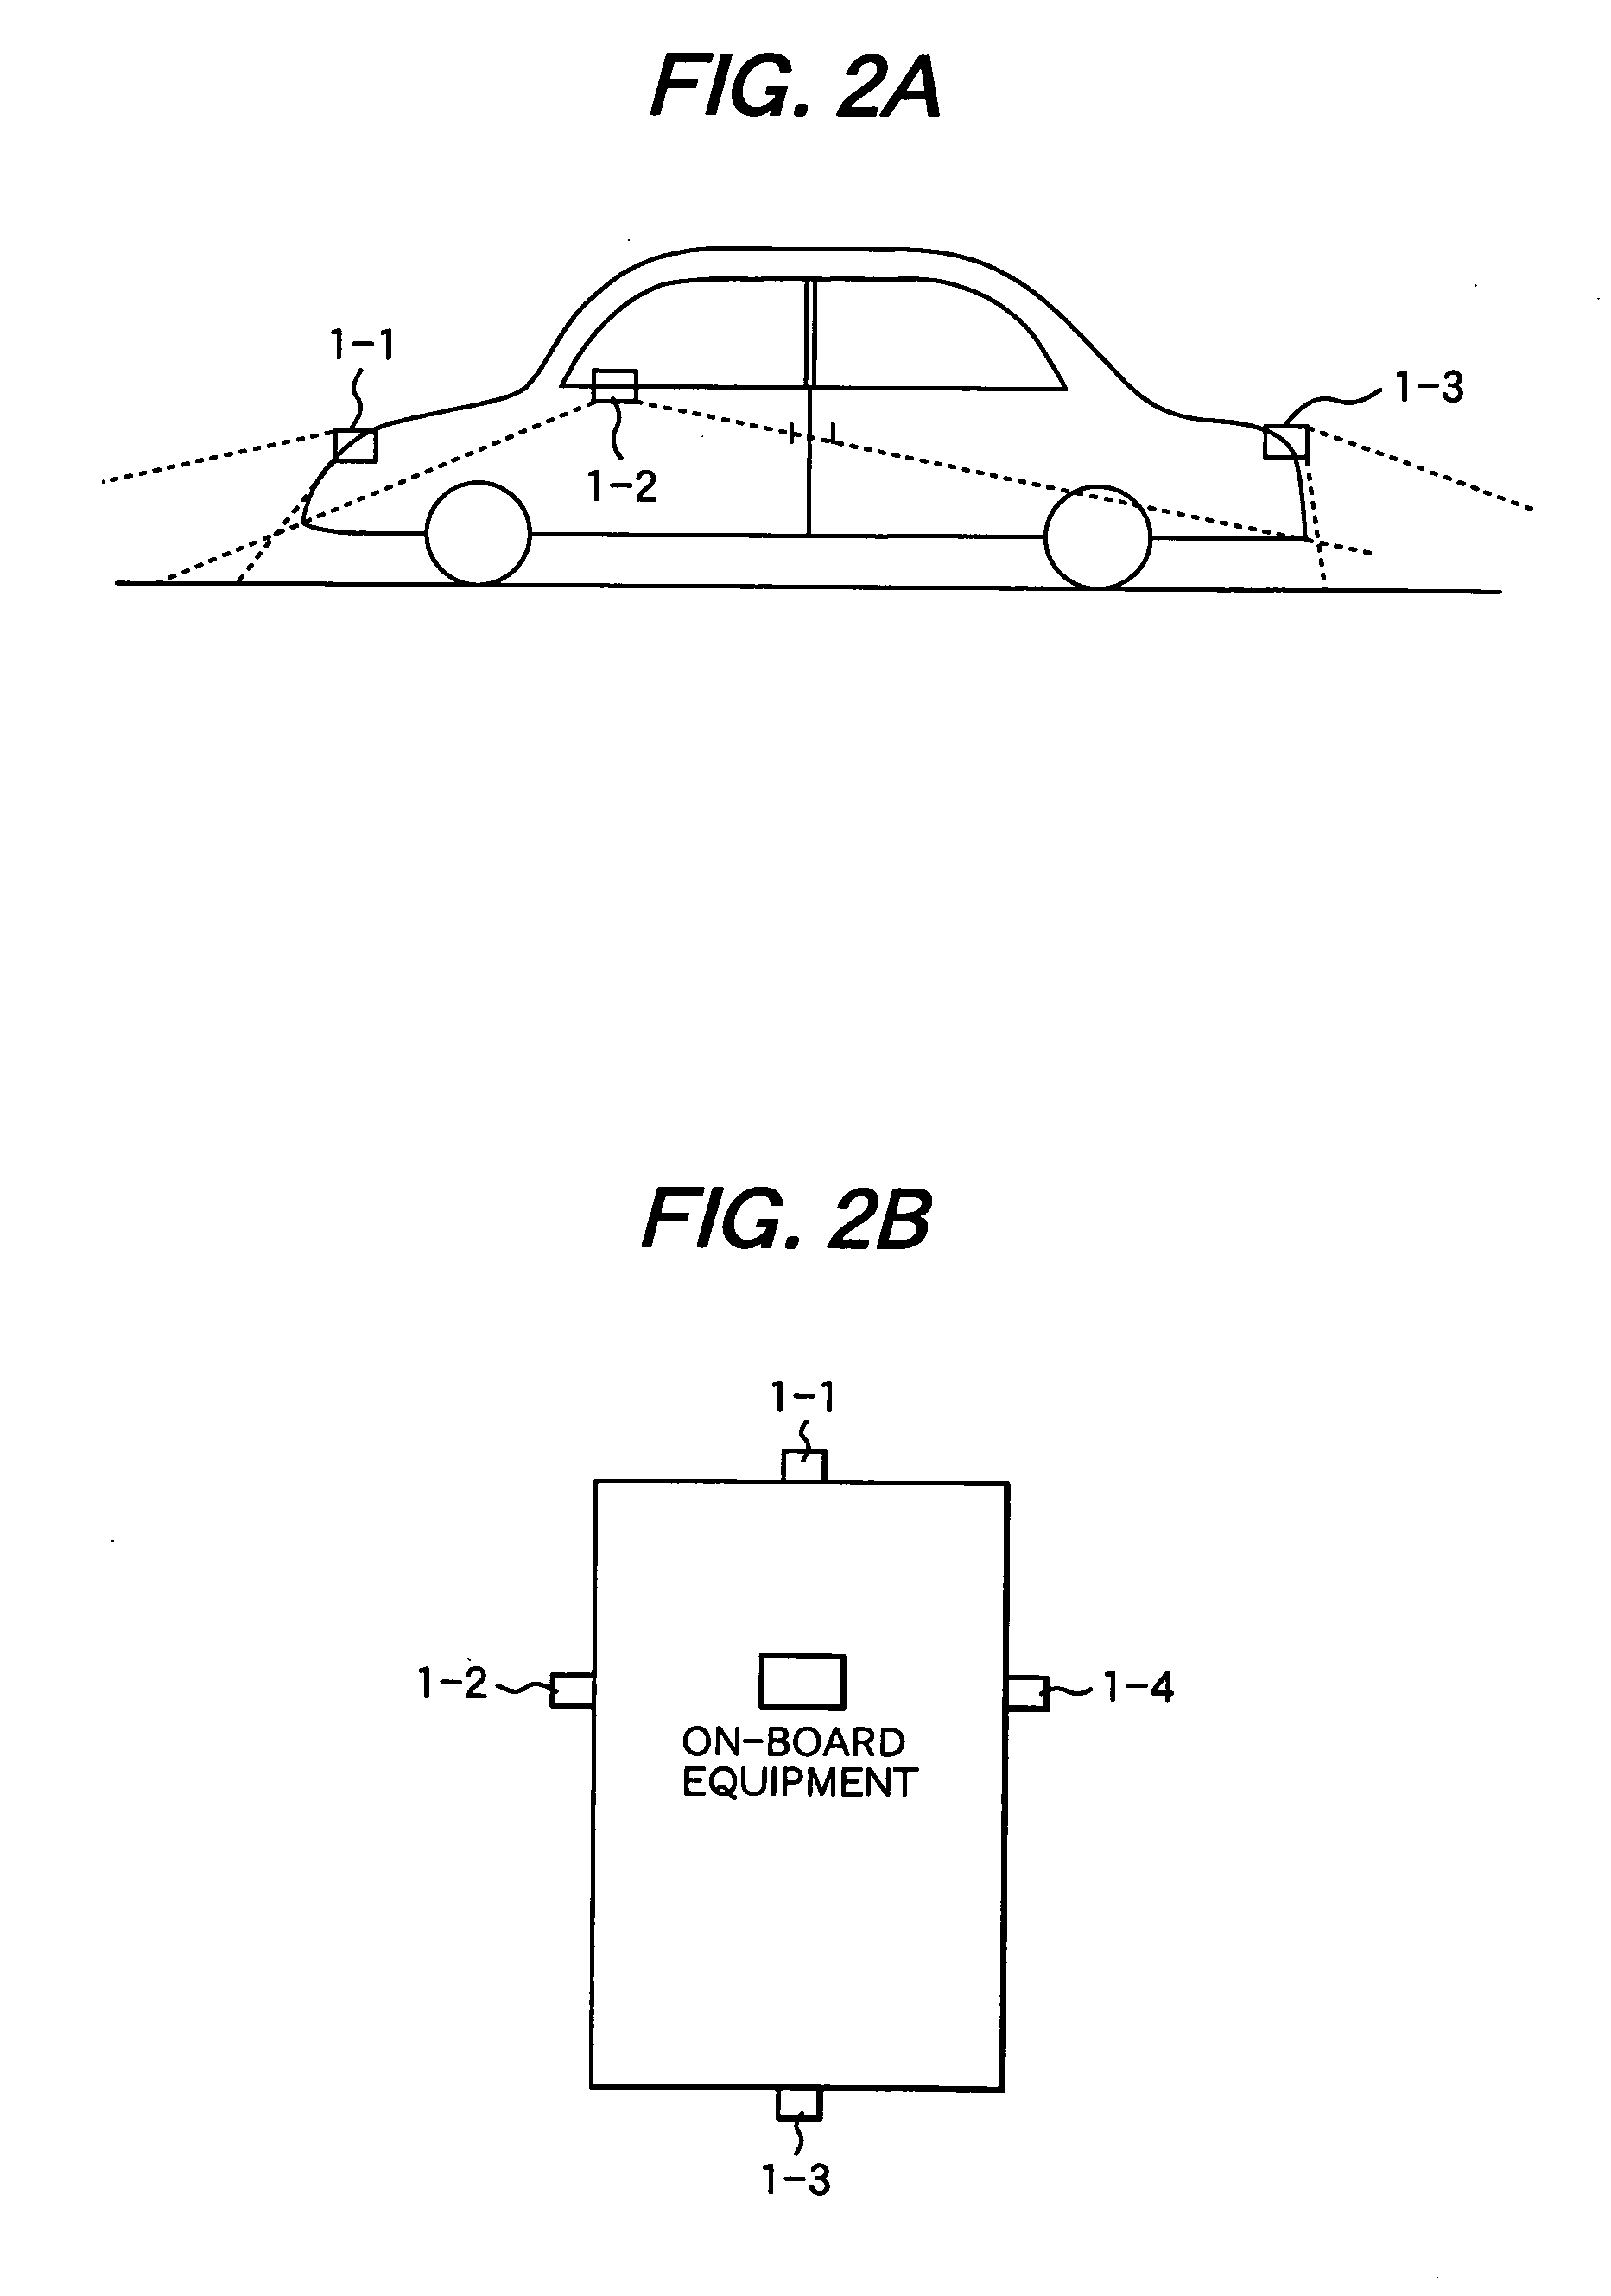 Method and system of monitoring around a vehicle